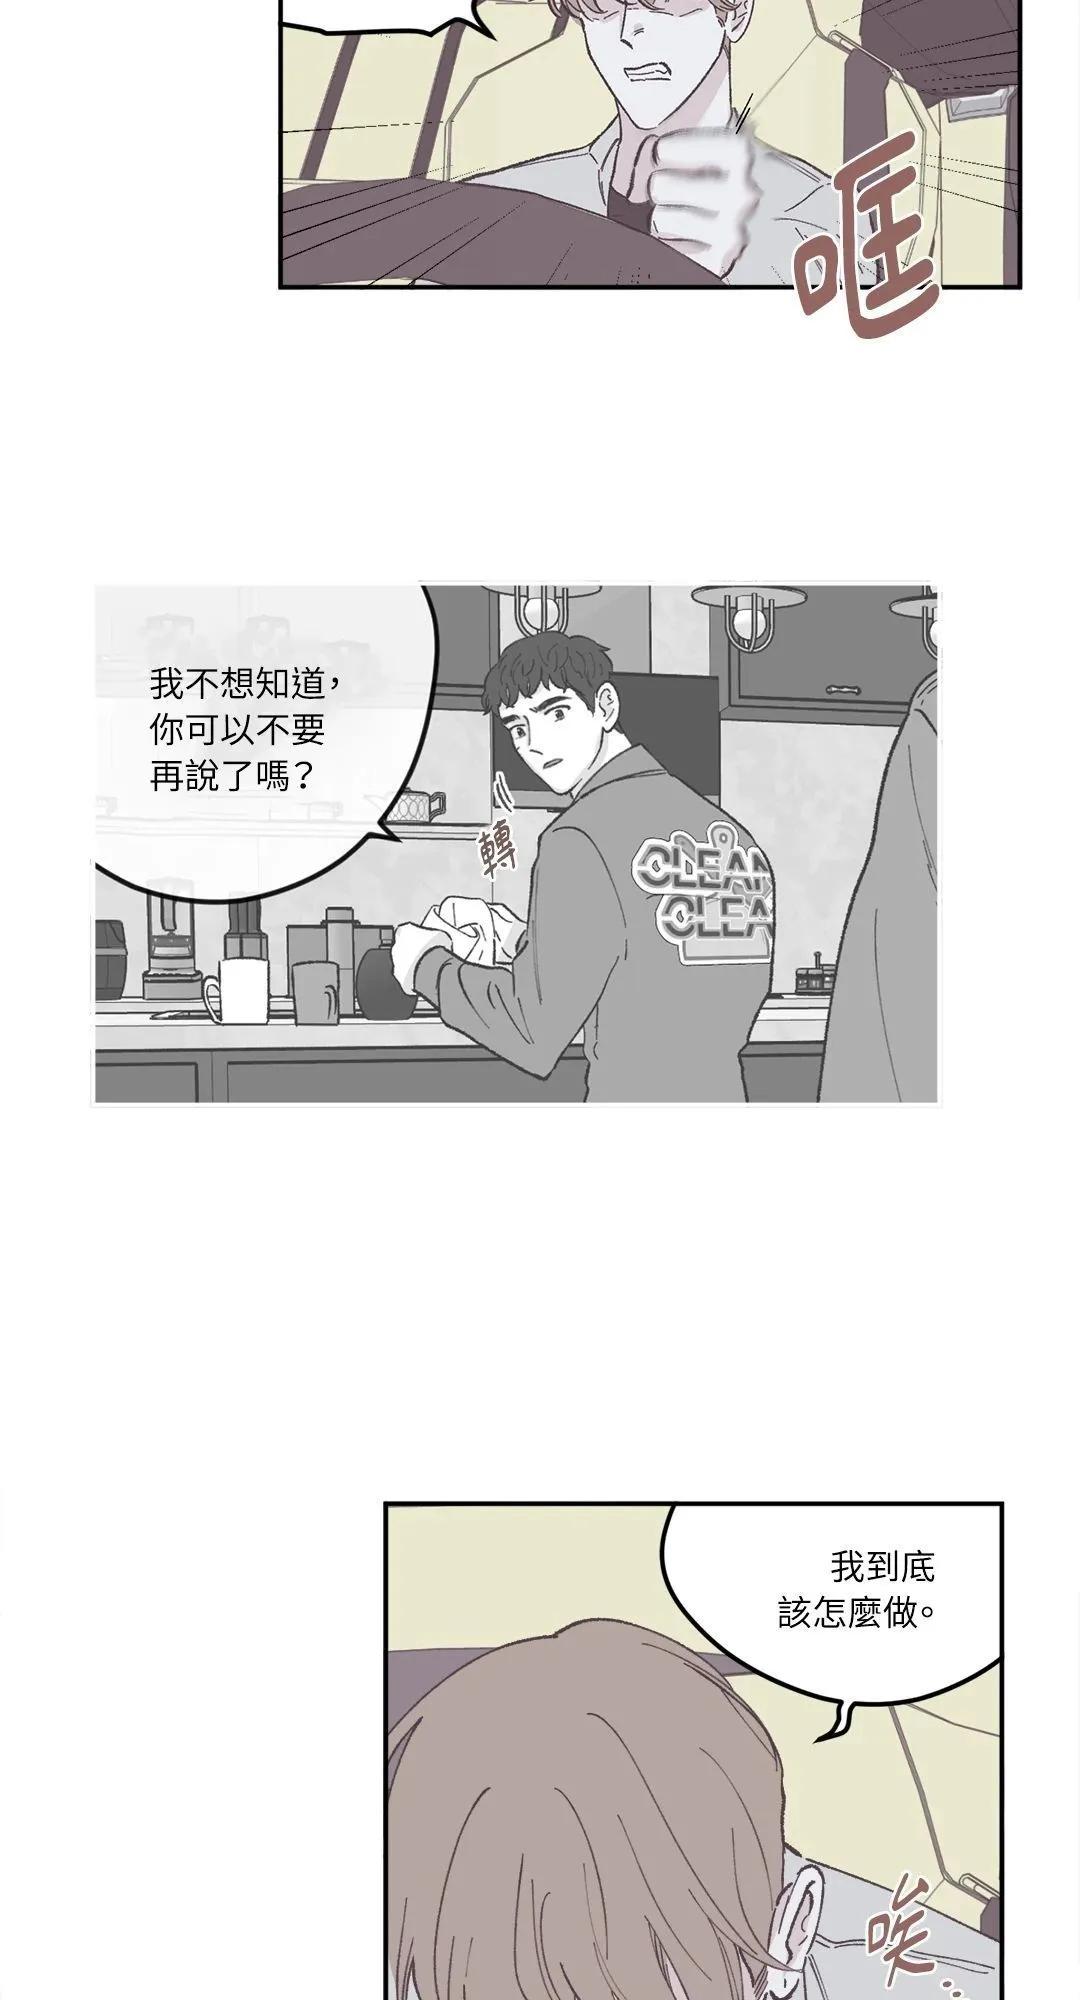 Clean Up百分百 - 第40话 - 1